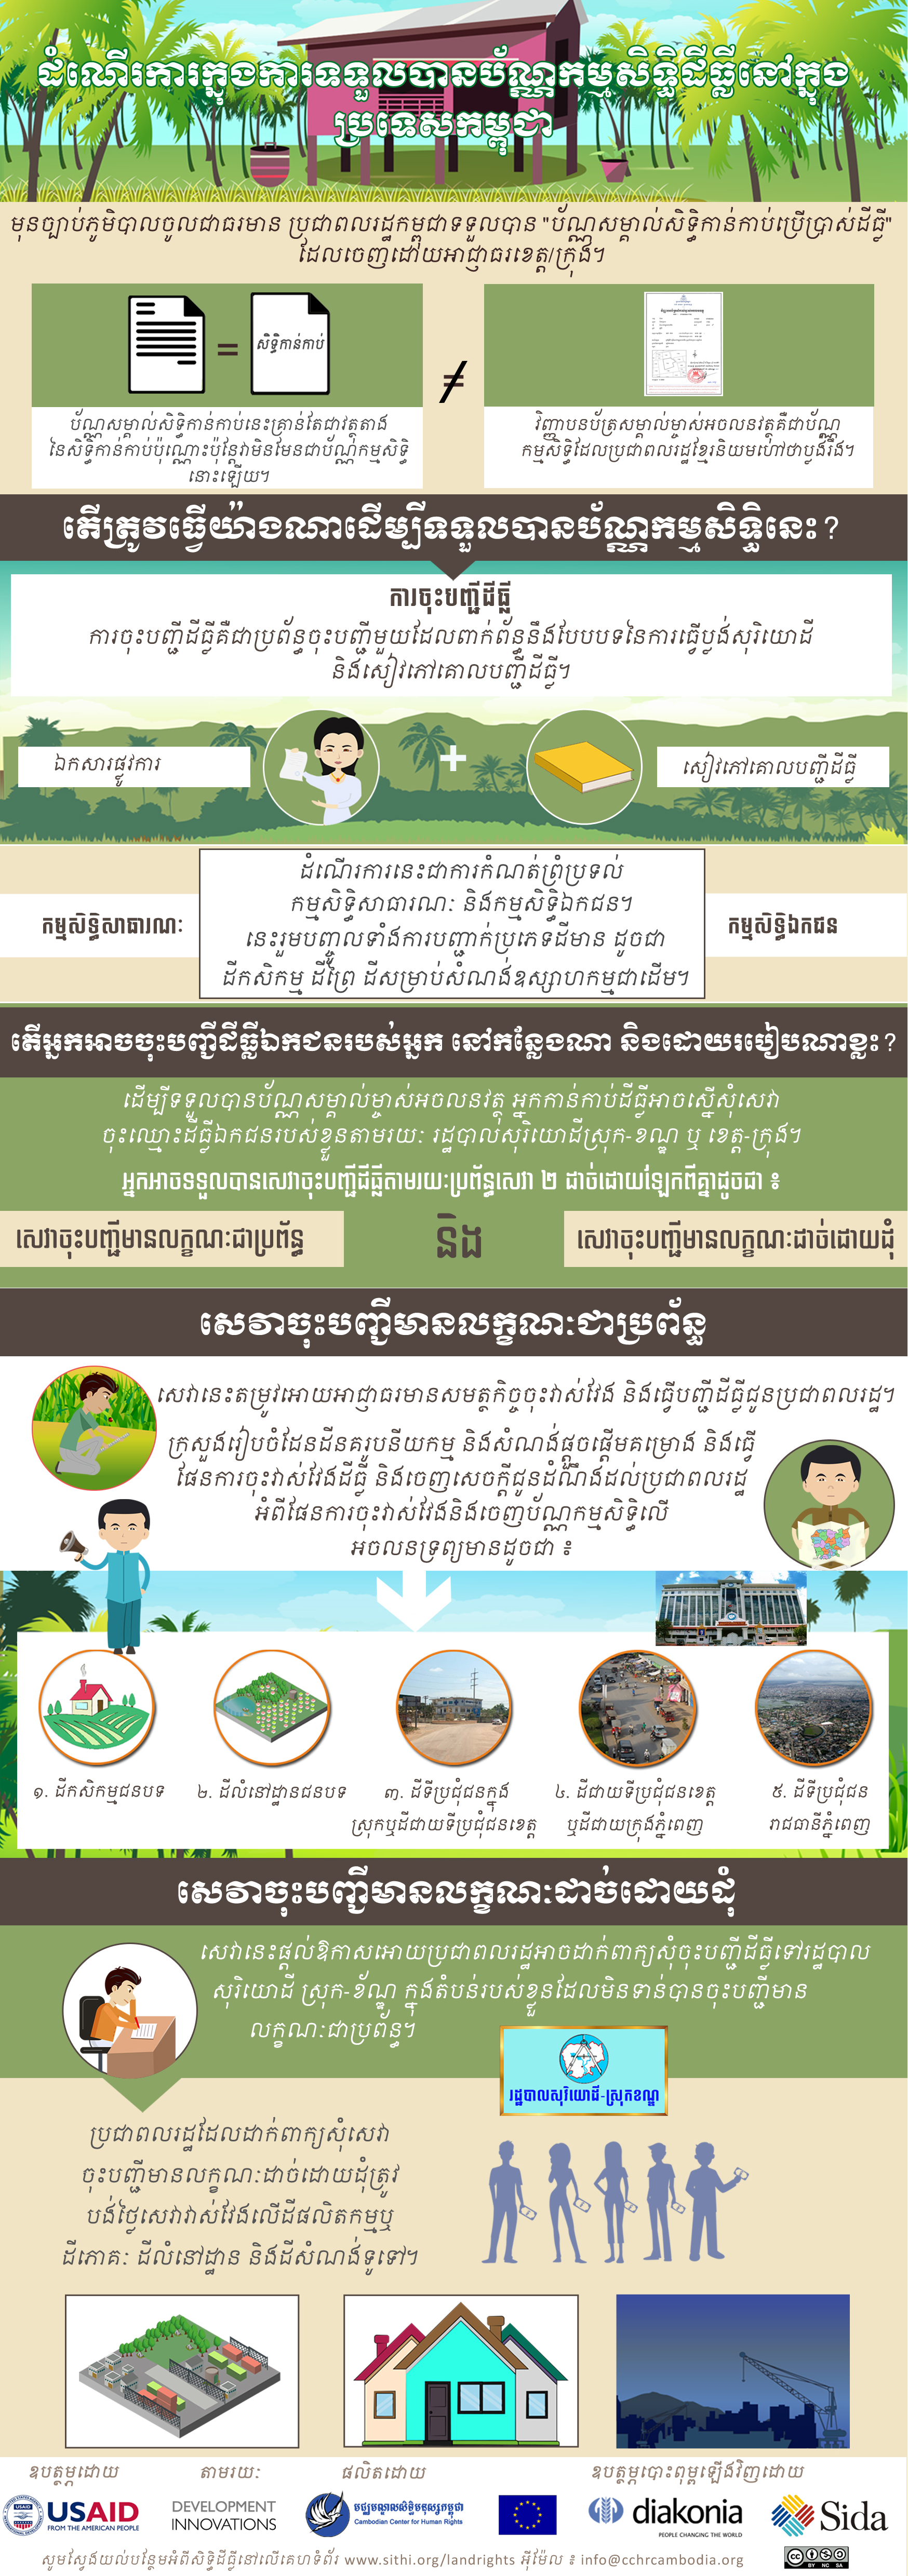 Procedures on Access to Land Titles in Cambodia 